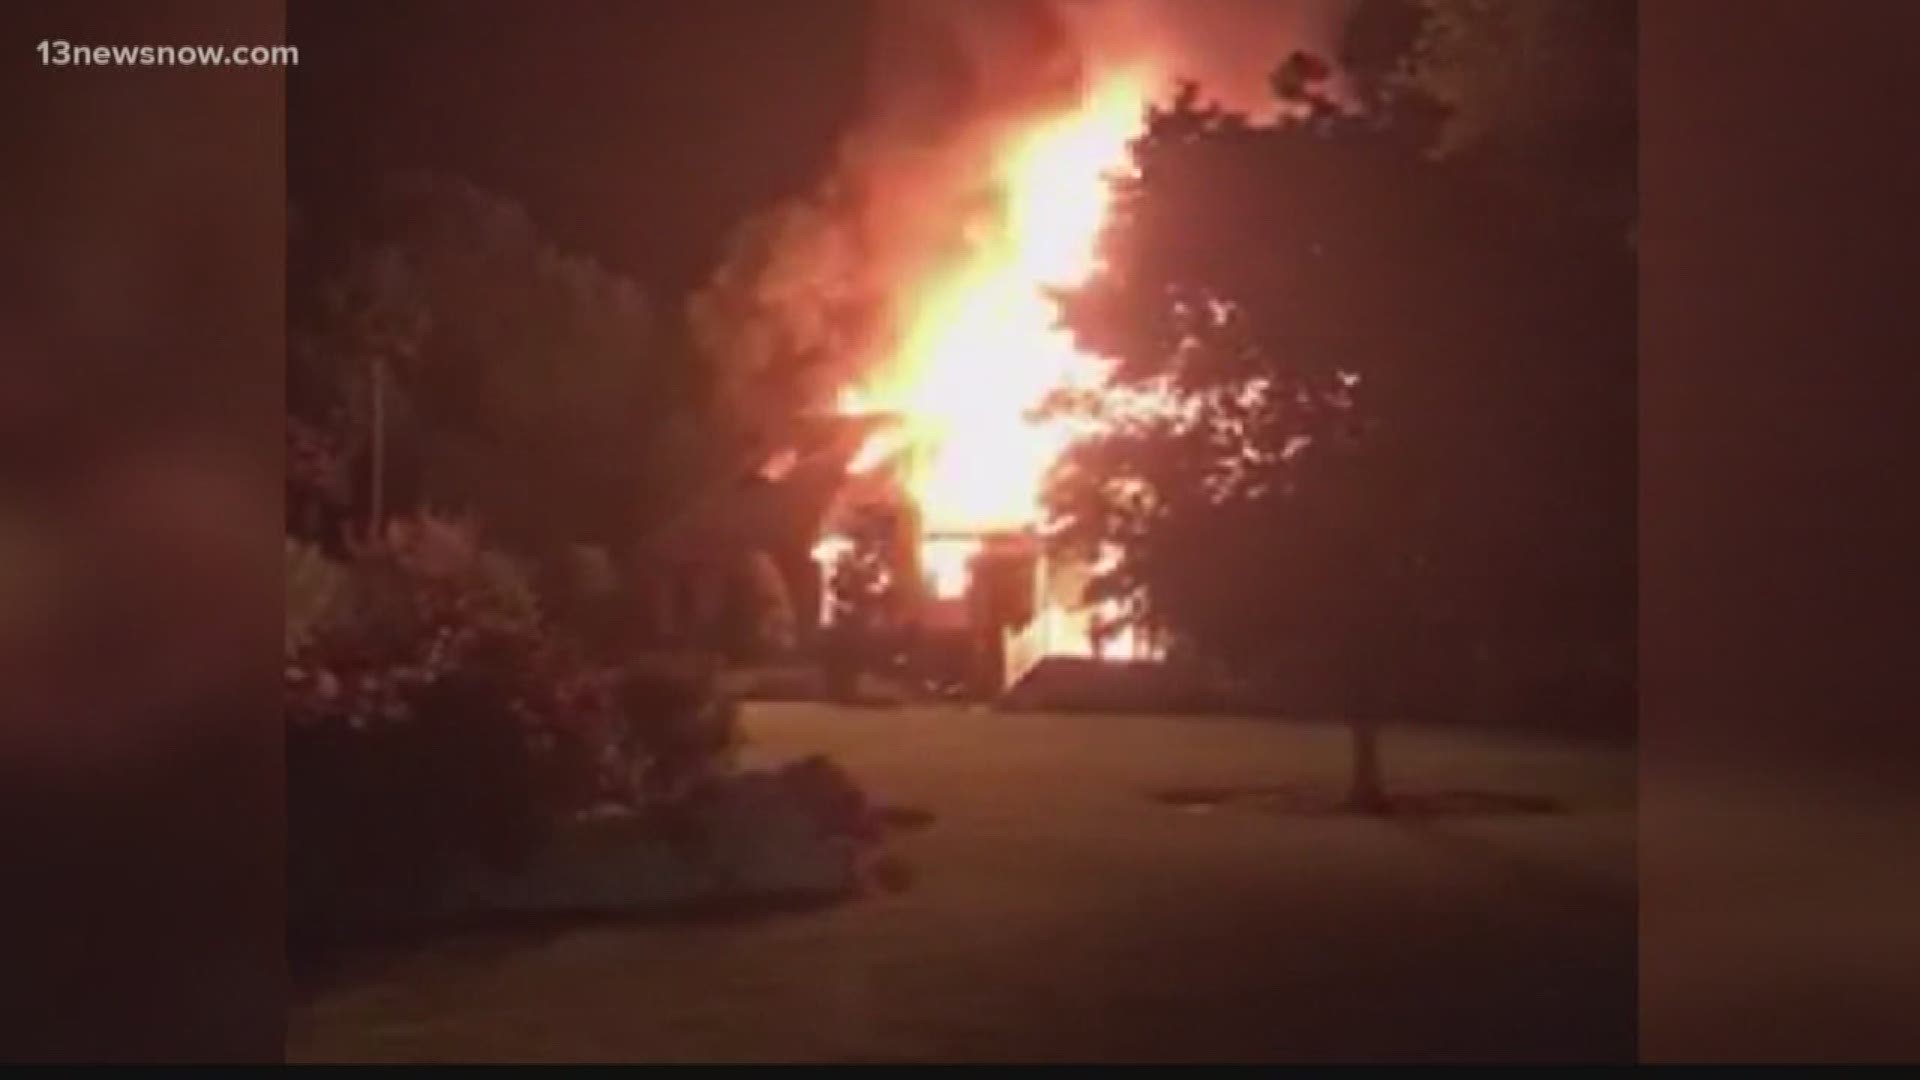 13News Now Megan Shinn talked to neighbors about a fire that ravaged a home in the Schooner Cove area of Suffolk.